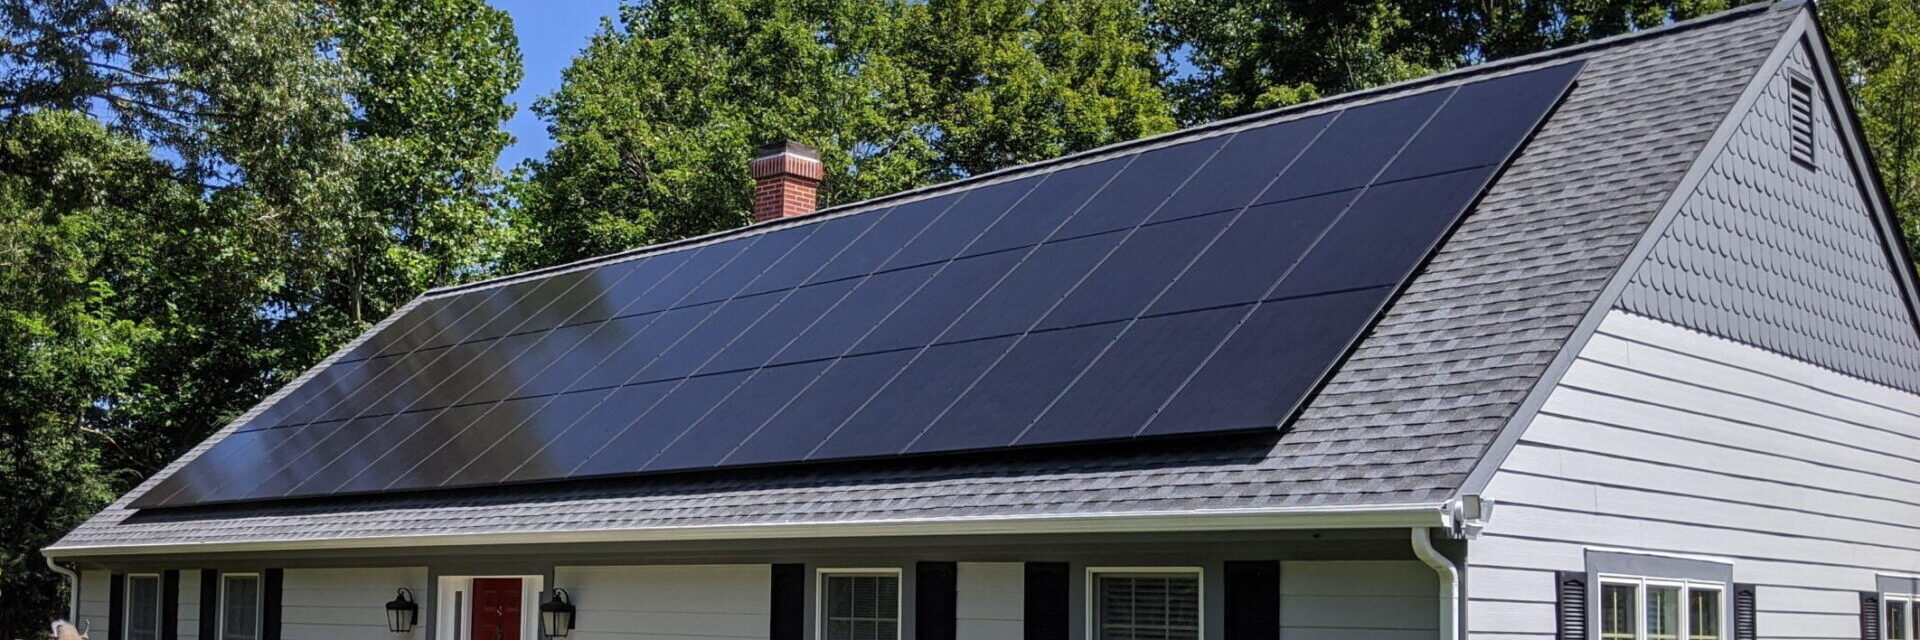 Solar panel system on white house rooftop in Louisa, Virginia